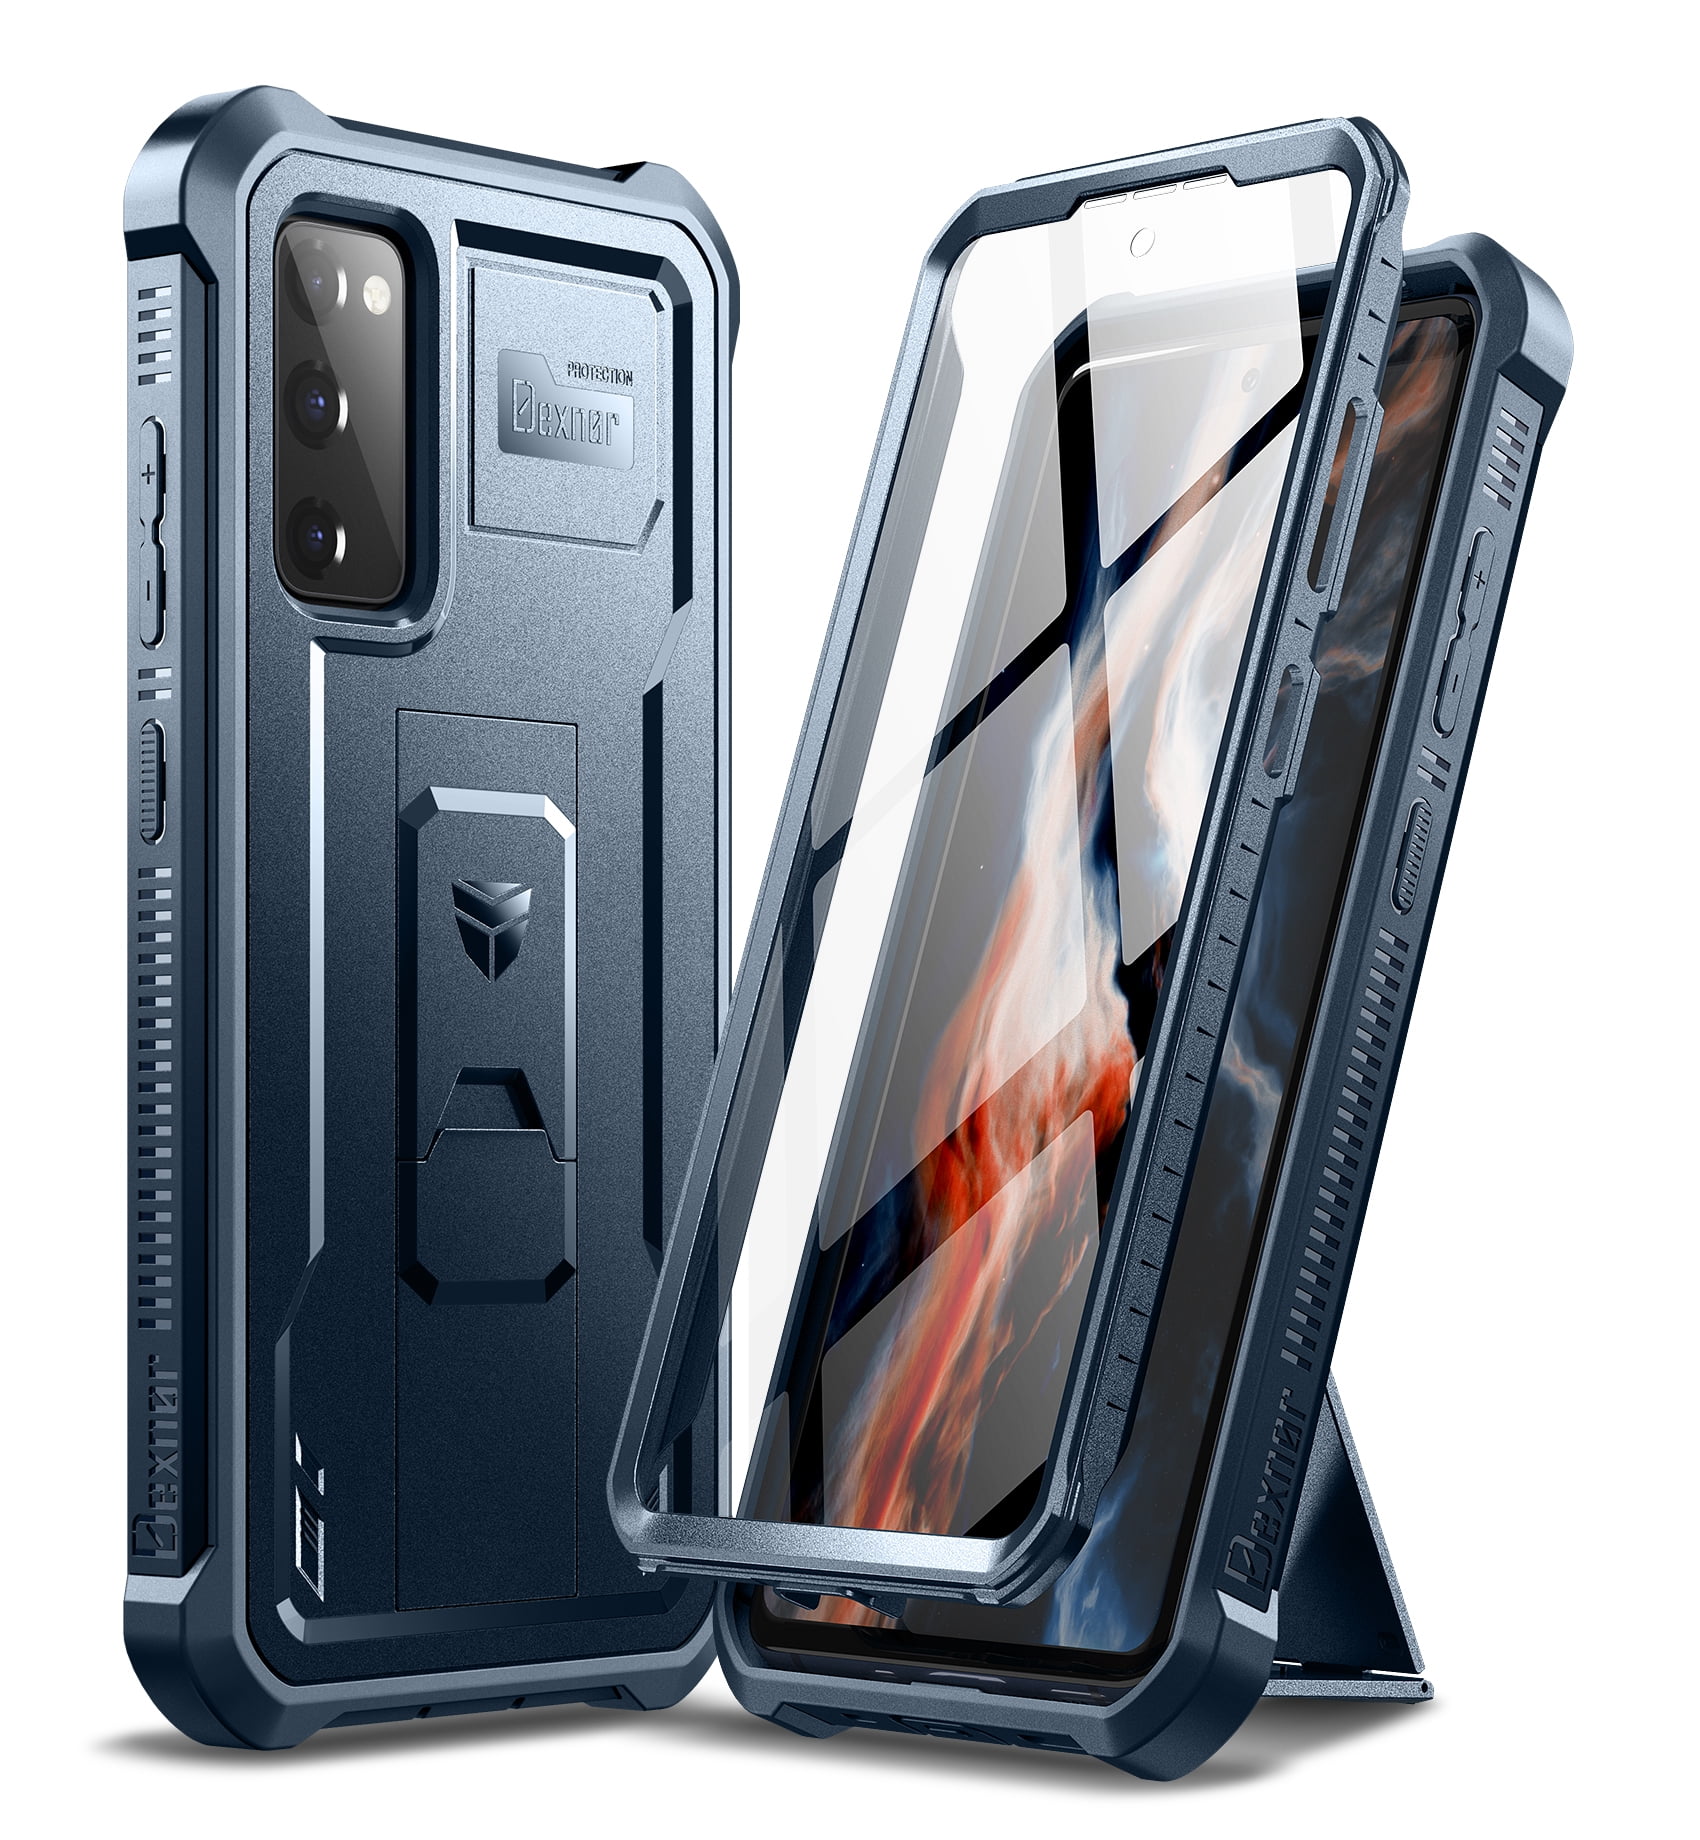 Dexnor for Samsung Galaxy S20 FE Case, [Built in Screen Protector